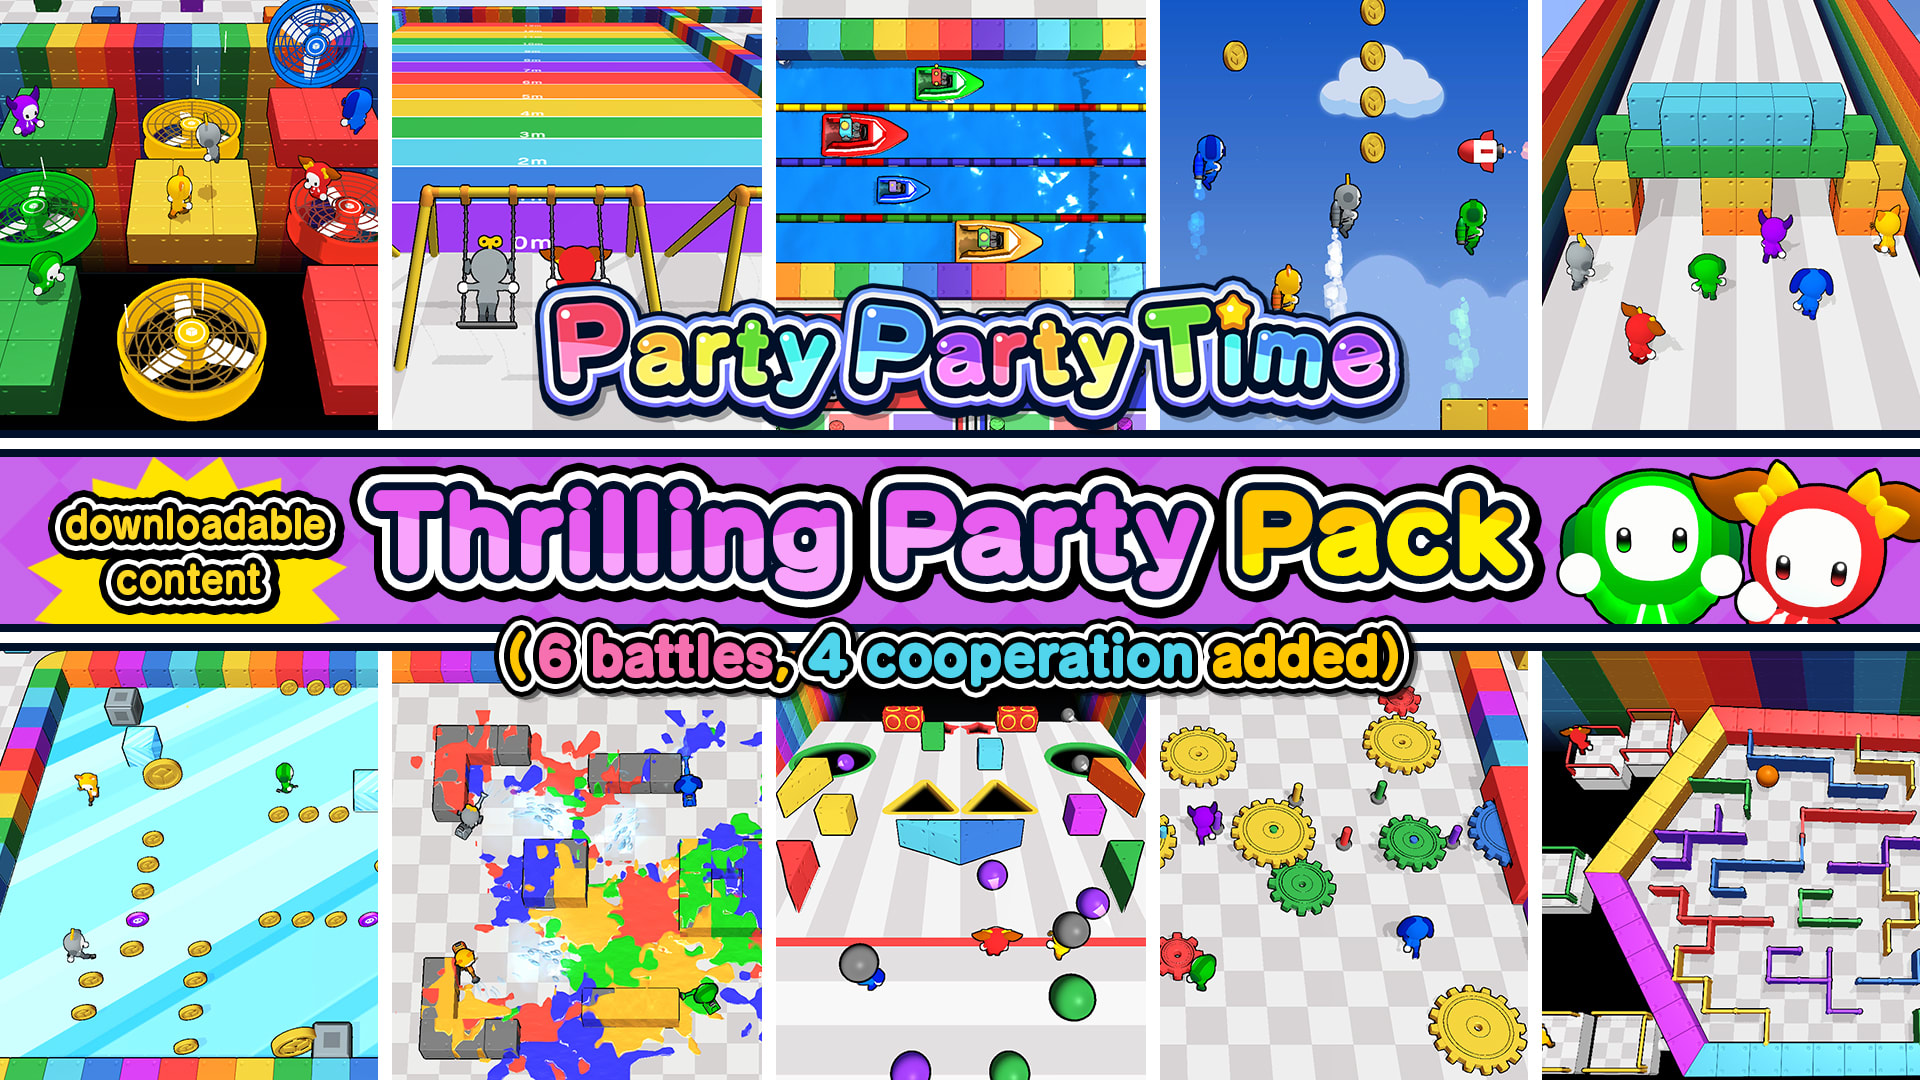 Thrilling Party Pack 1